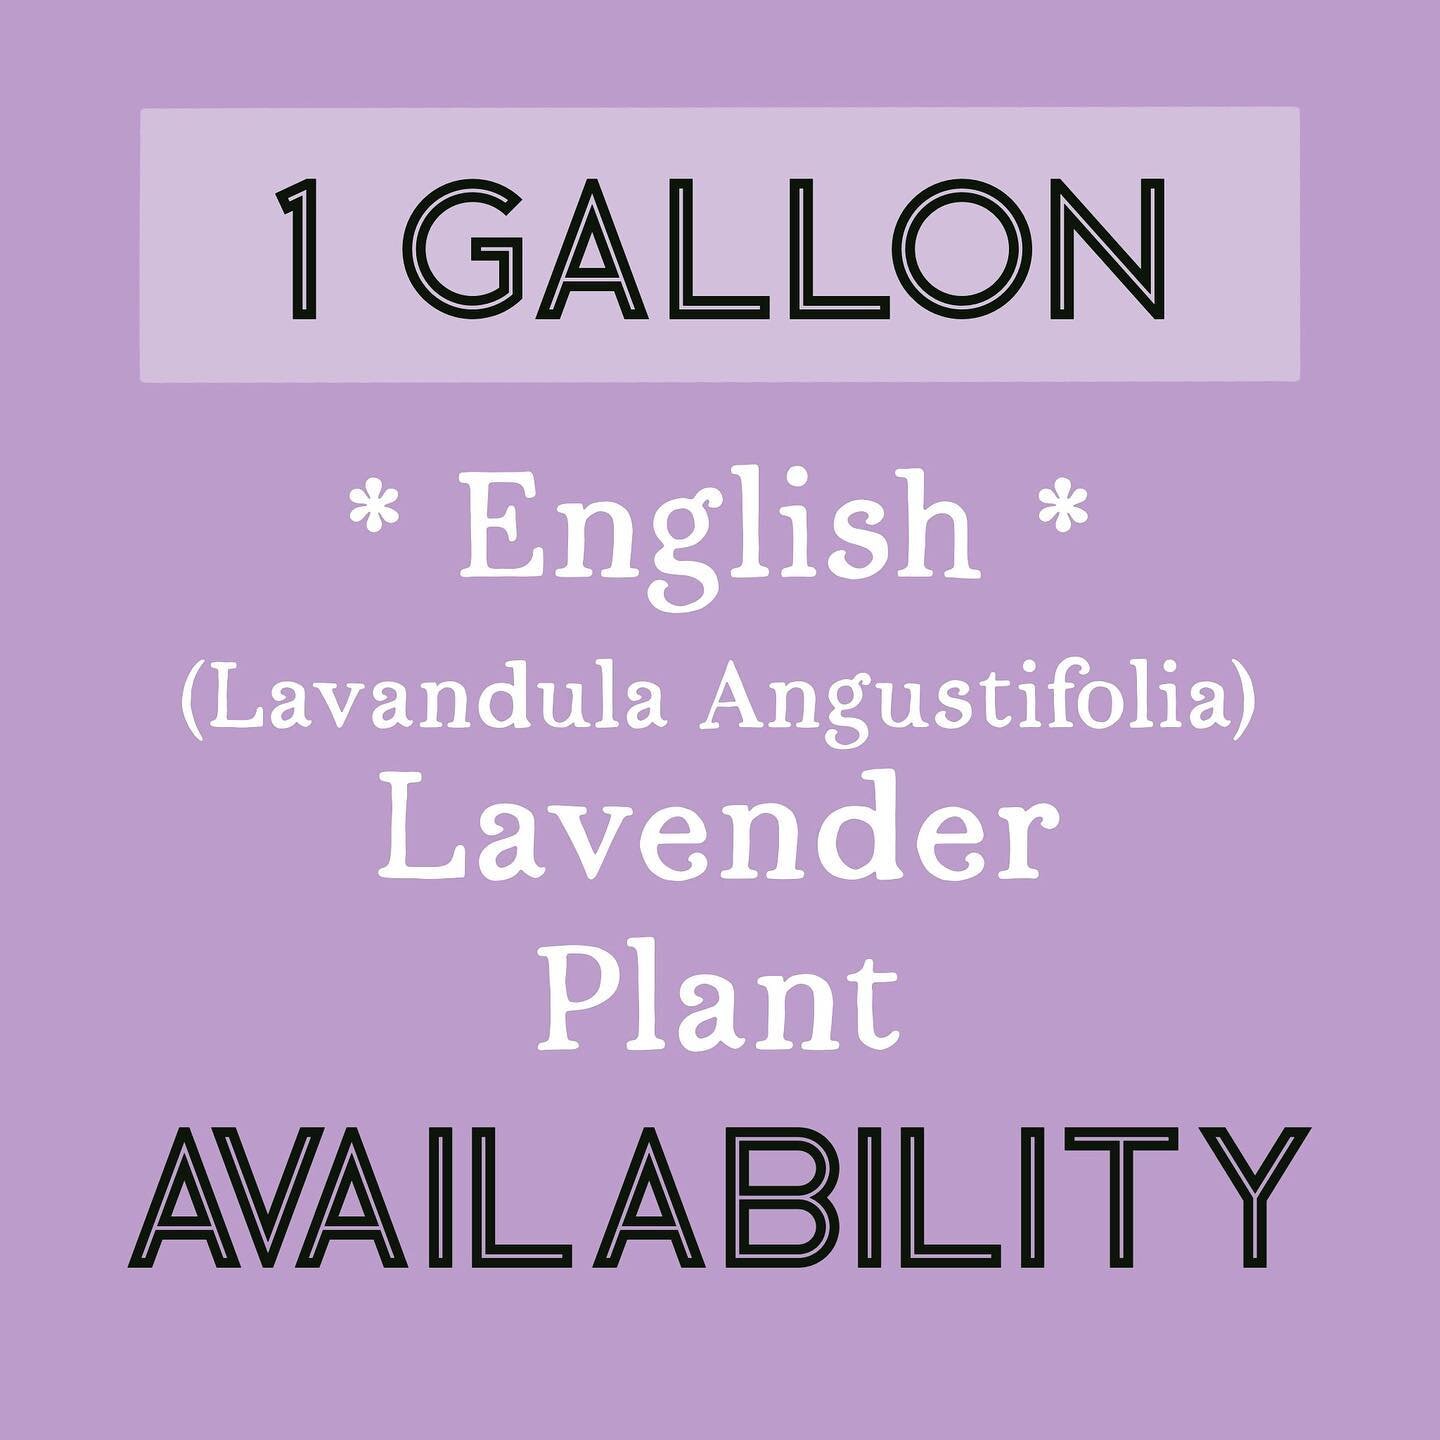 ✨1 GALLON ENGLISH✨
Lavender available 
💜Be sure to read about each variety on our website!
(Link in bio)
Prices will be at Camas Plant &amp; Garden Fair
🌼Saturday, May 13
🌿9am-4pm
🌸Downtown Camas
#lacamaslavenderfarm 
&bull; &bull; &bull;
#camasw